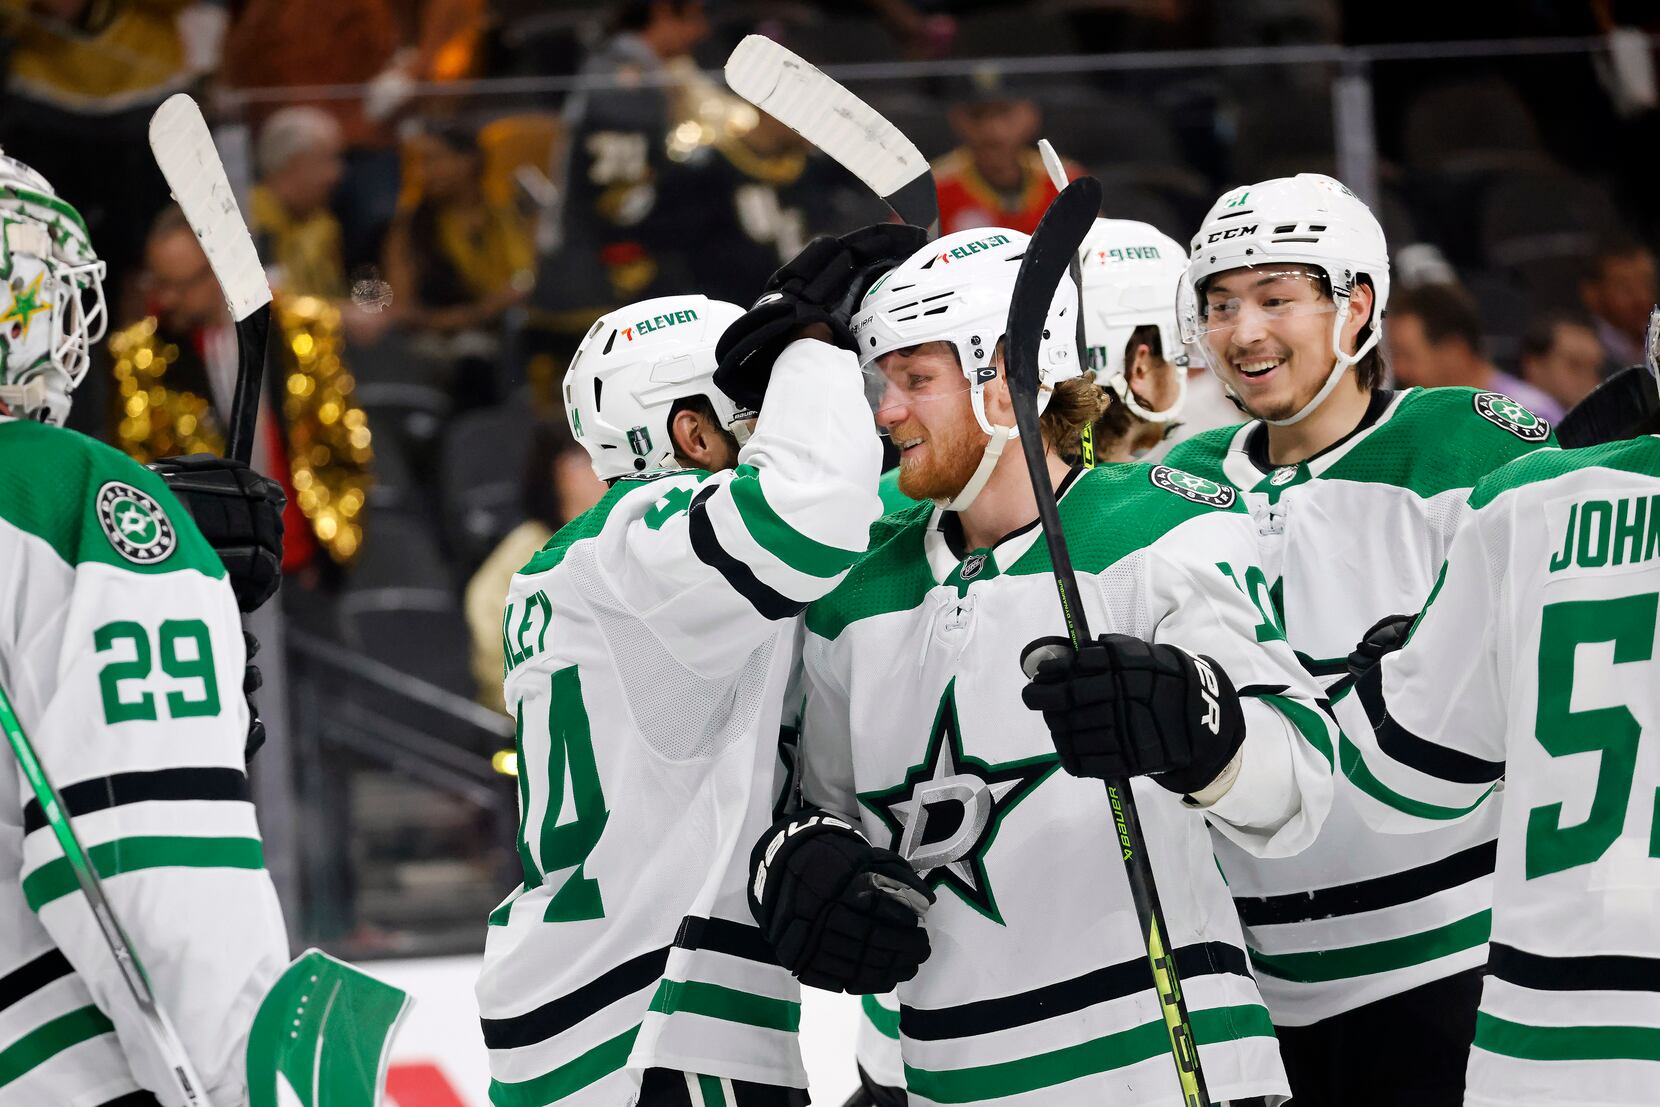 Dallas Stars: Mapping Out Their Improbable Road To Stanley Cup Playoffs